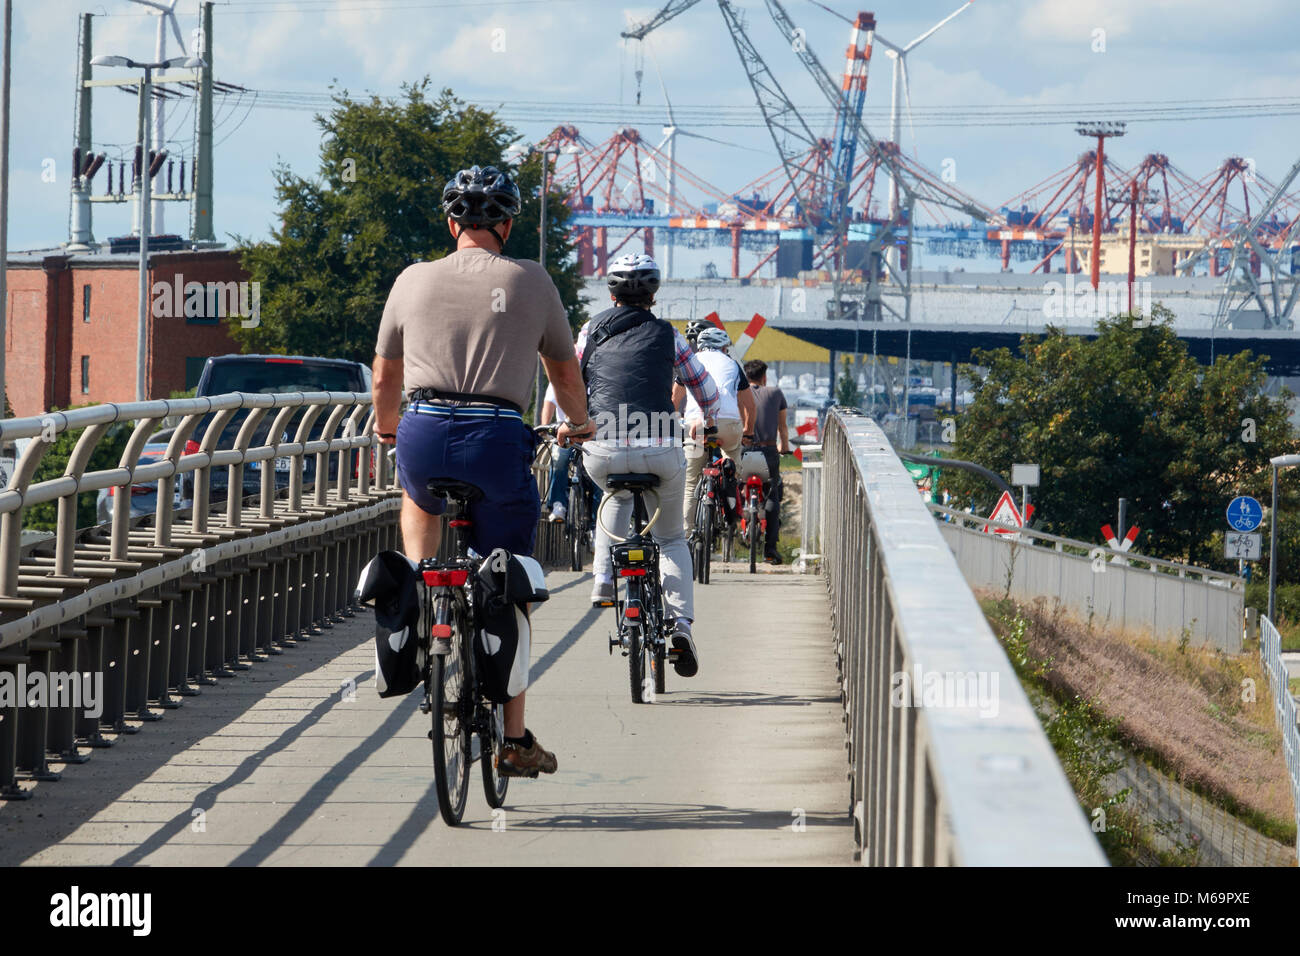 Group of tourists on bicycles go to the seaport of Hamurgh. Stock Photo